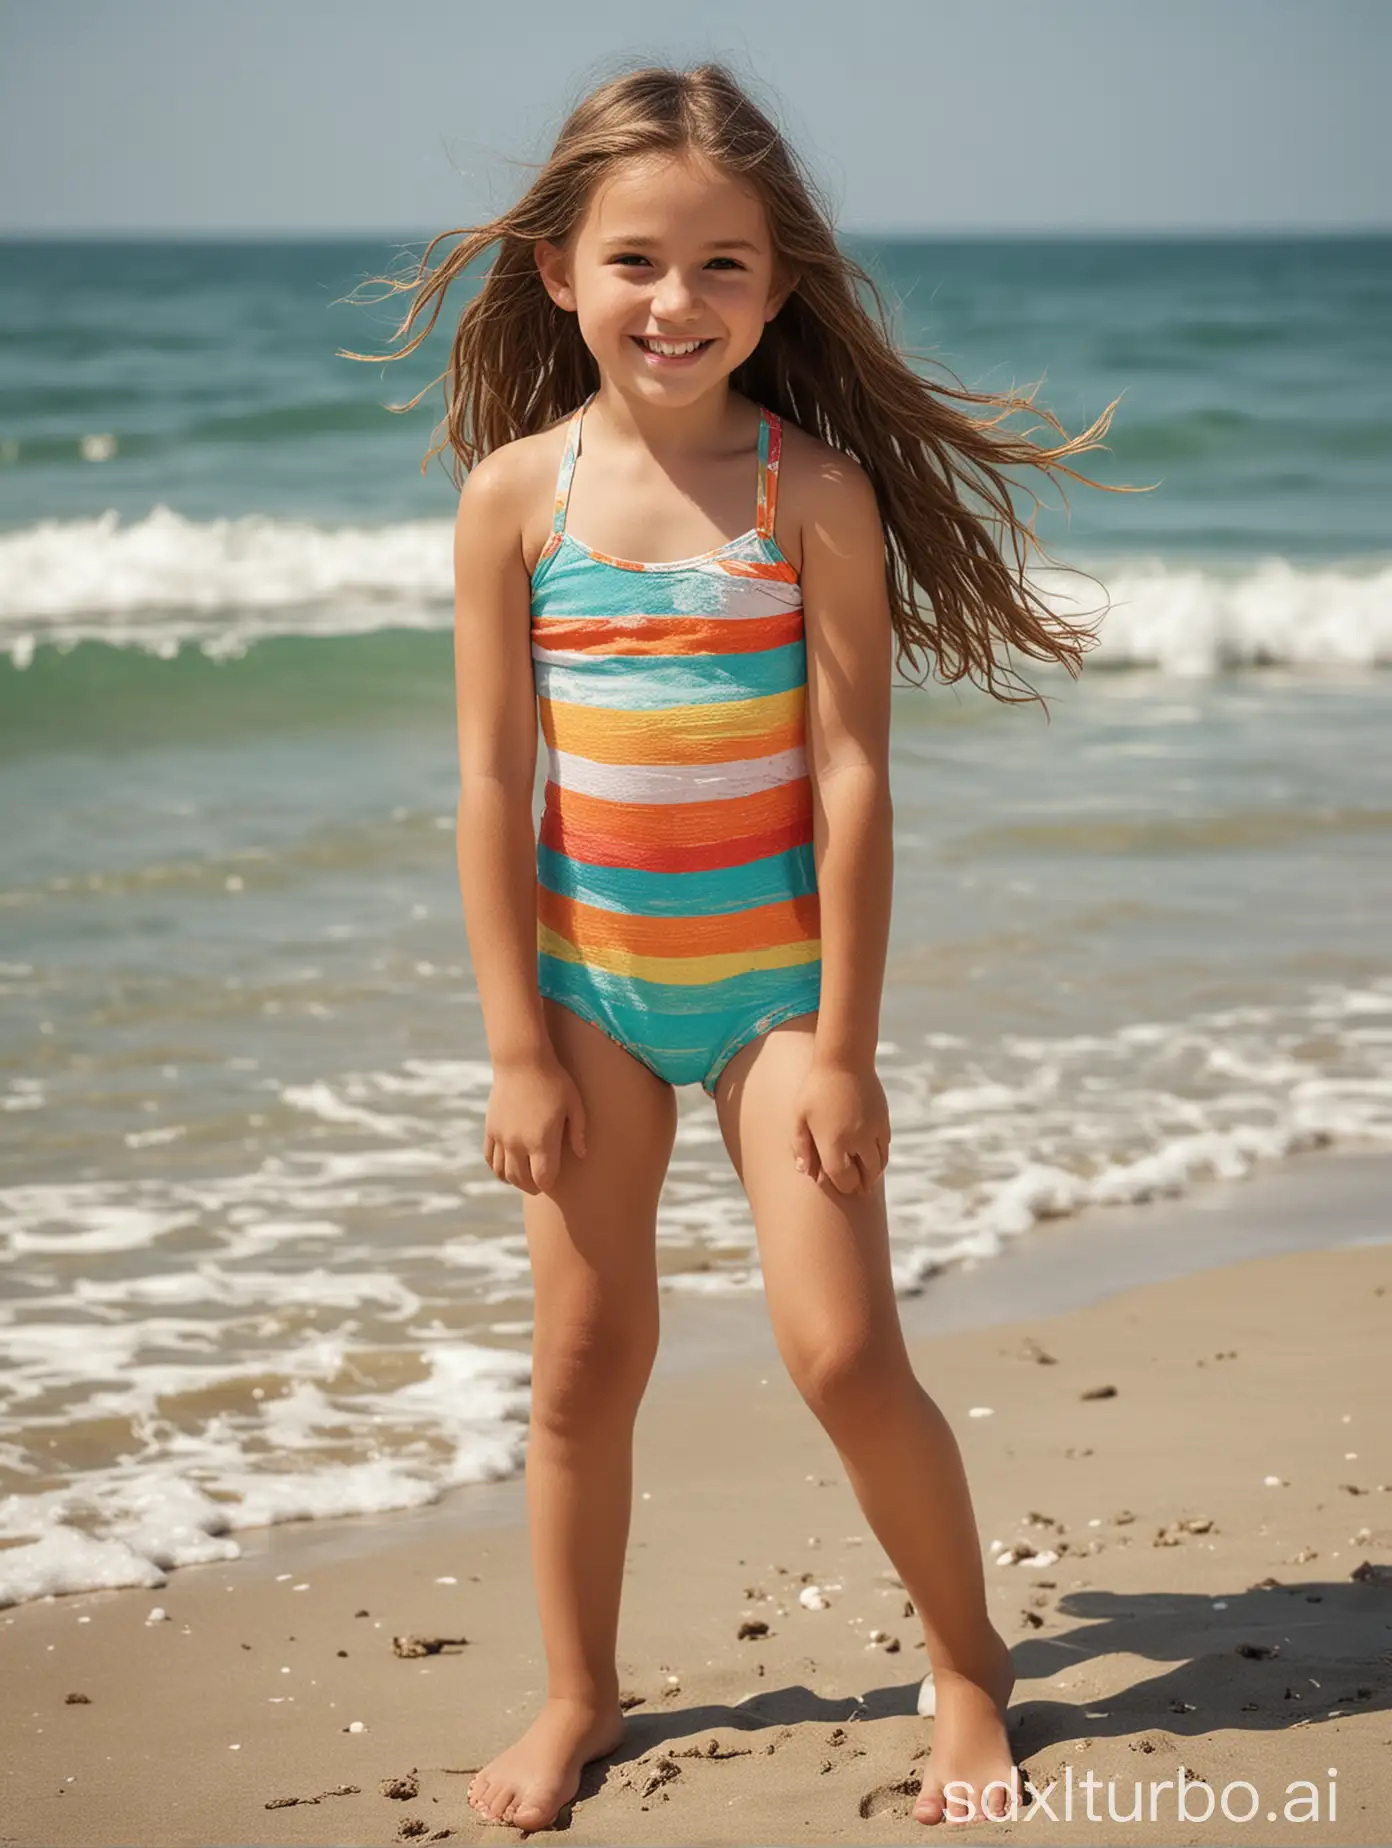 Subject: The main subject of the image is a 9-year-old girl.nSetting: The setting is a beach, indicated by the mention of sand and water.nBackground: The background could feature a sunny beach with waves gently crashing onto the shore, enhancing the summery vibe.nStyle/Coloring: The style could be vibrant and colorful, with bright hues to capture the lively atmosphere of a beach day.nAction: The girl is smiling, indicating joy and contentment. She might be posing confidently to showcase her muscular abs, suggesting pride or confidence.nItems: The girl is wearing a tiny swimsuit, emphasizing her physique.nCostume/Appearance: The girl has long hair and wears a swimsuit, typical attire for a beach day.nAccessories: Accessories might include sunglasses, sunscreen, or a beach towel nearby, adding realism to the beach setting.